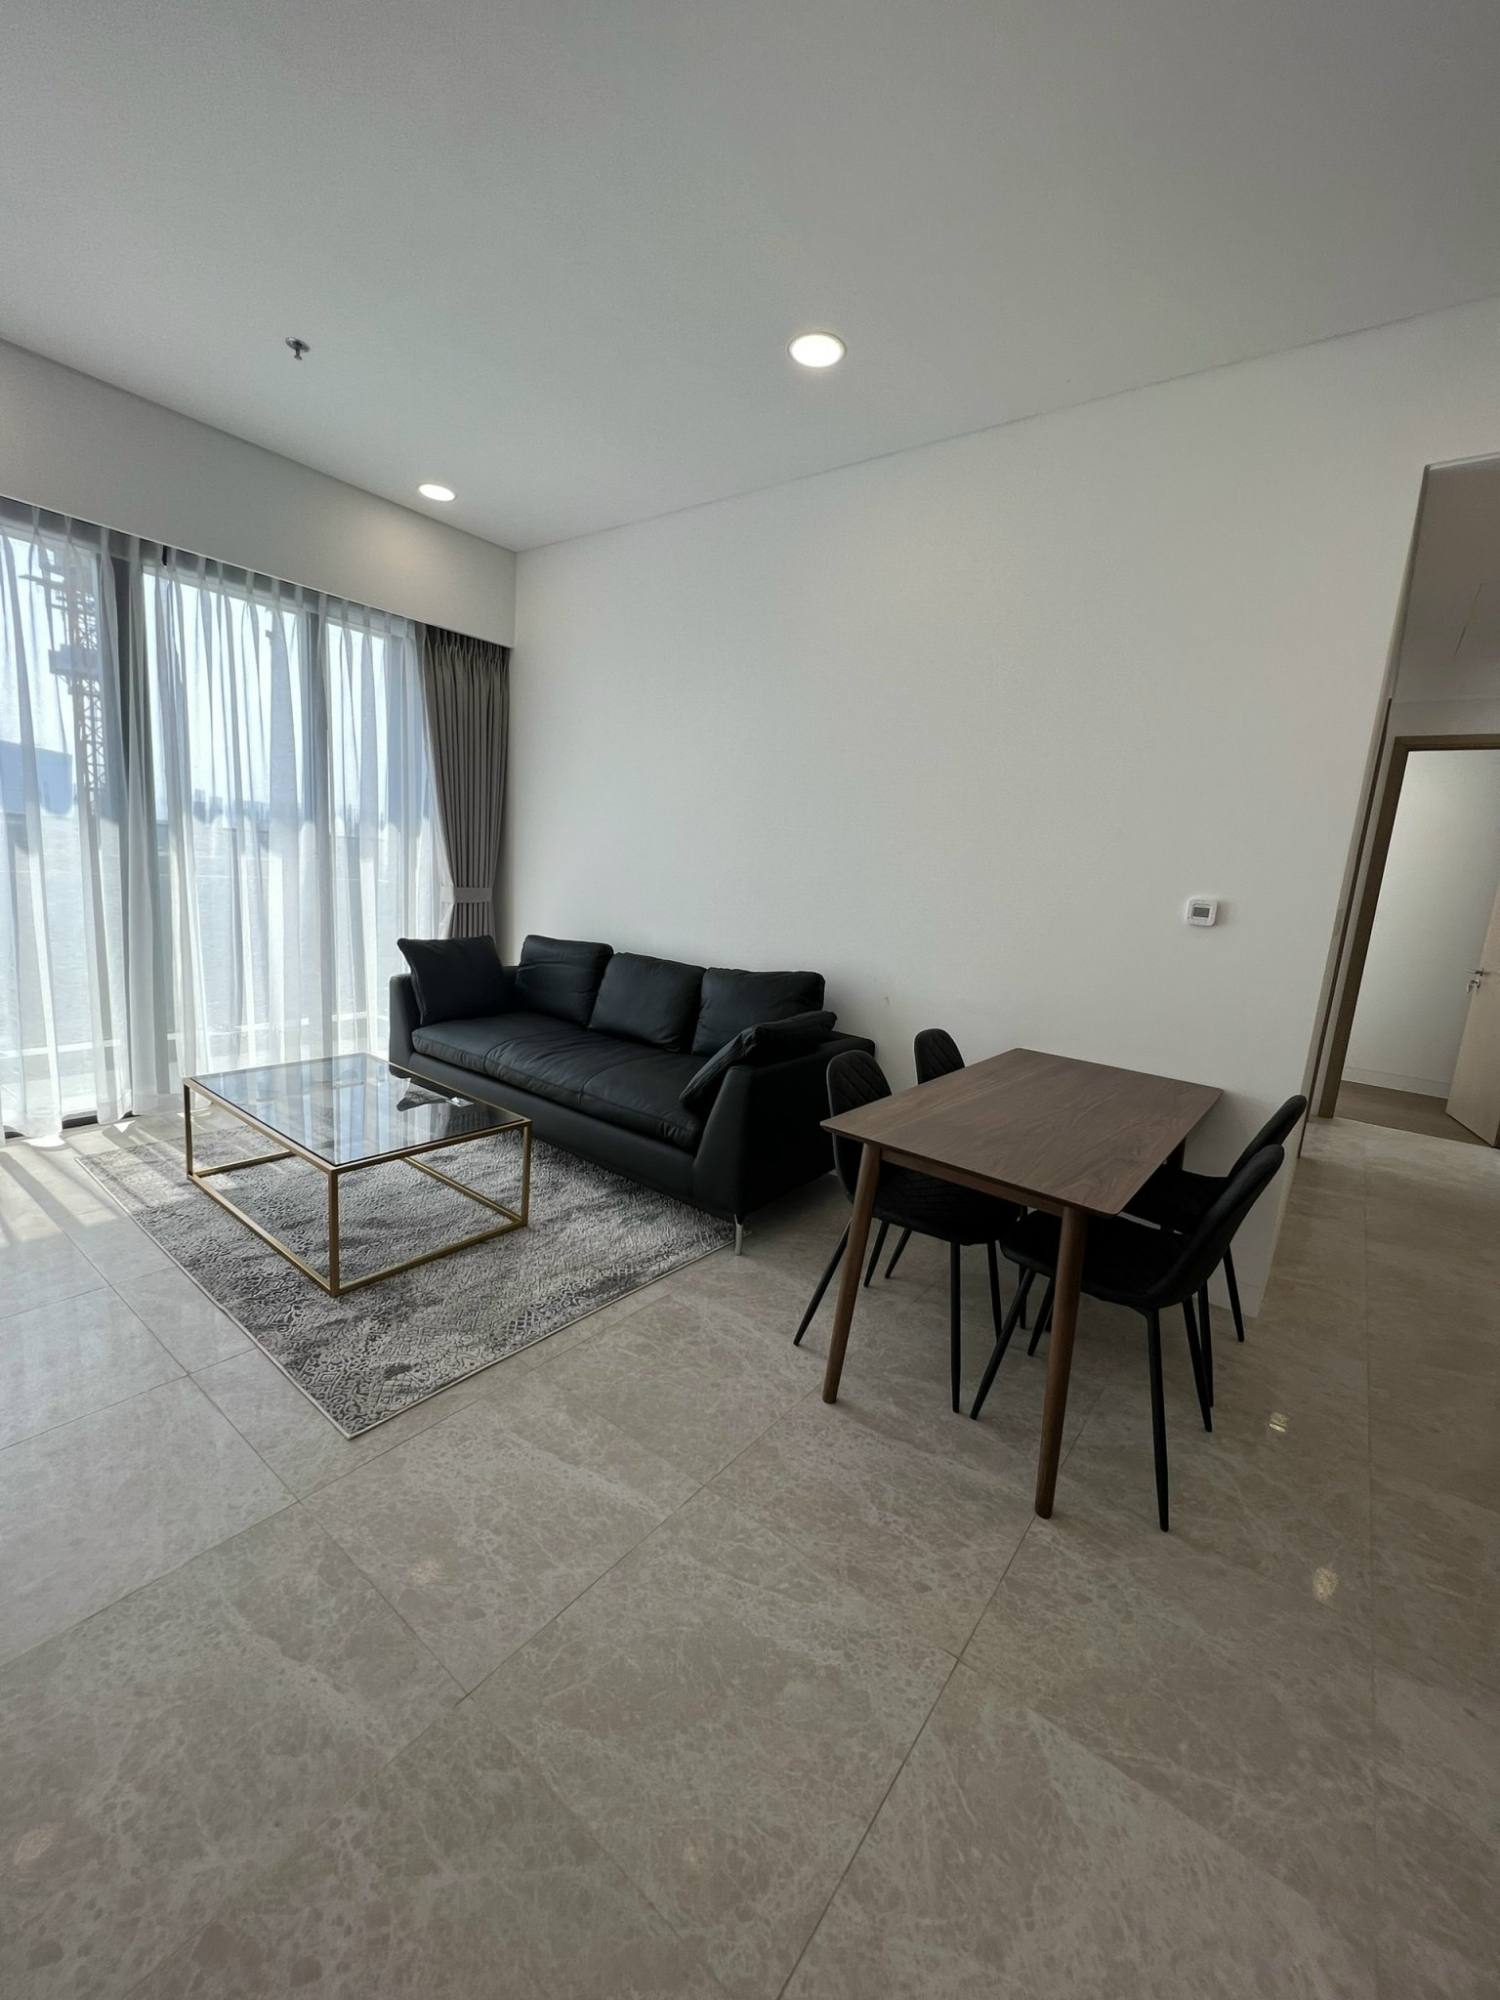 2 bedroom apartment for rent - 84m2 high floor good price in The River Thu Thiem